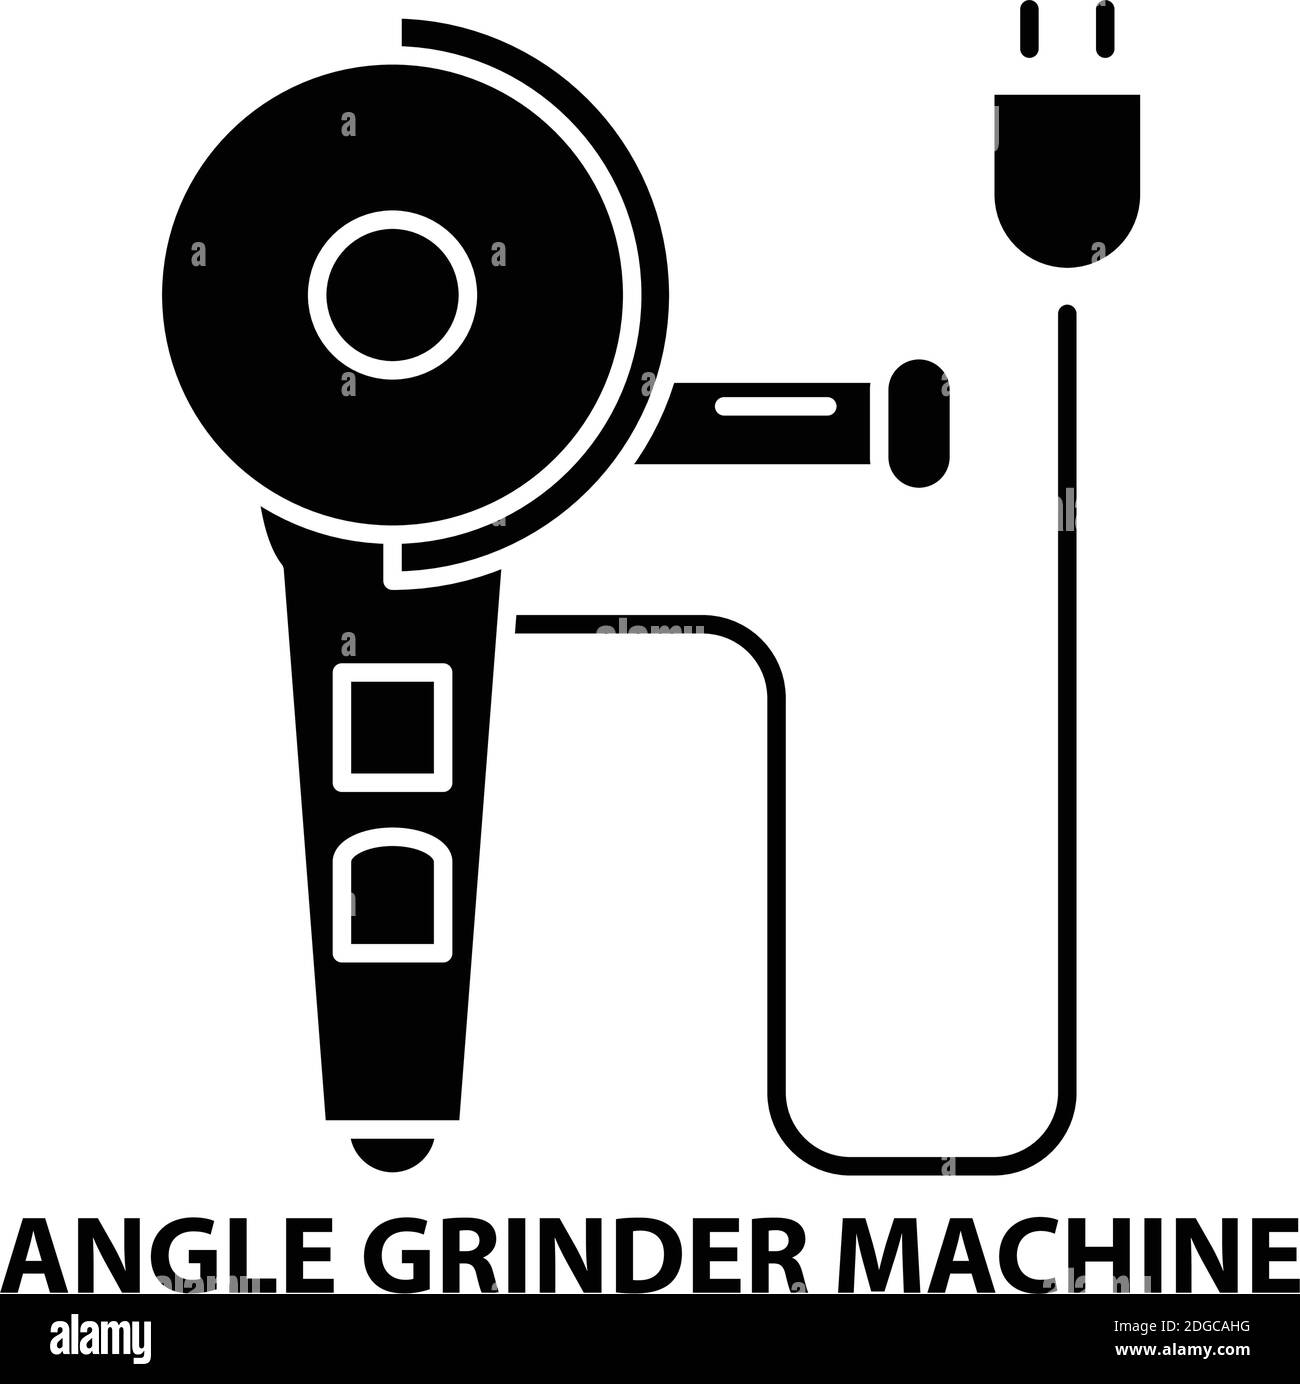 angle grinder machine icon, black vector sign with editable strokes, concept illustration Stock Vector